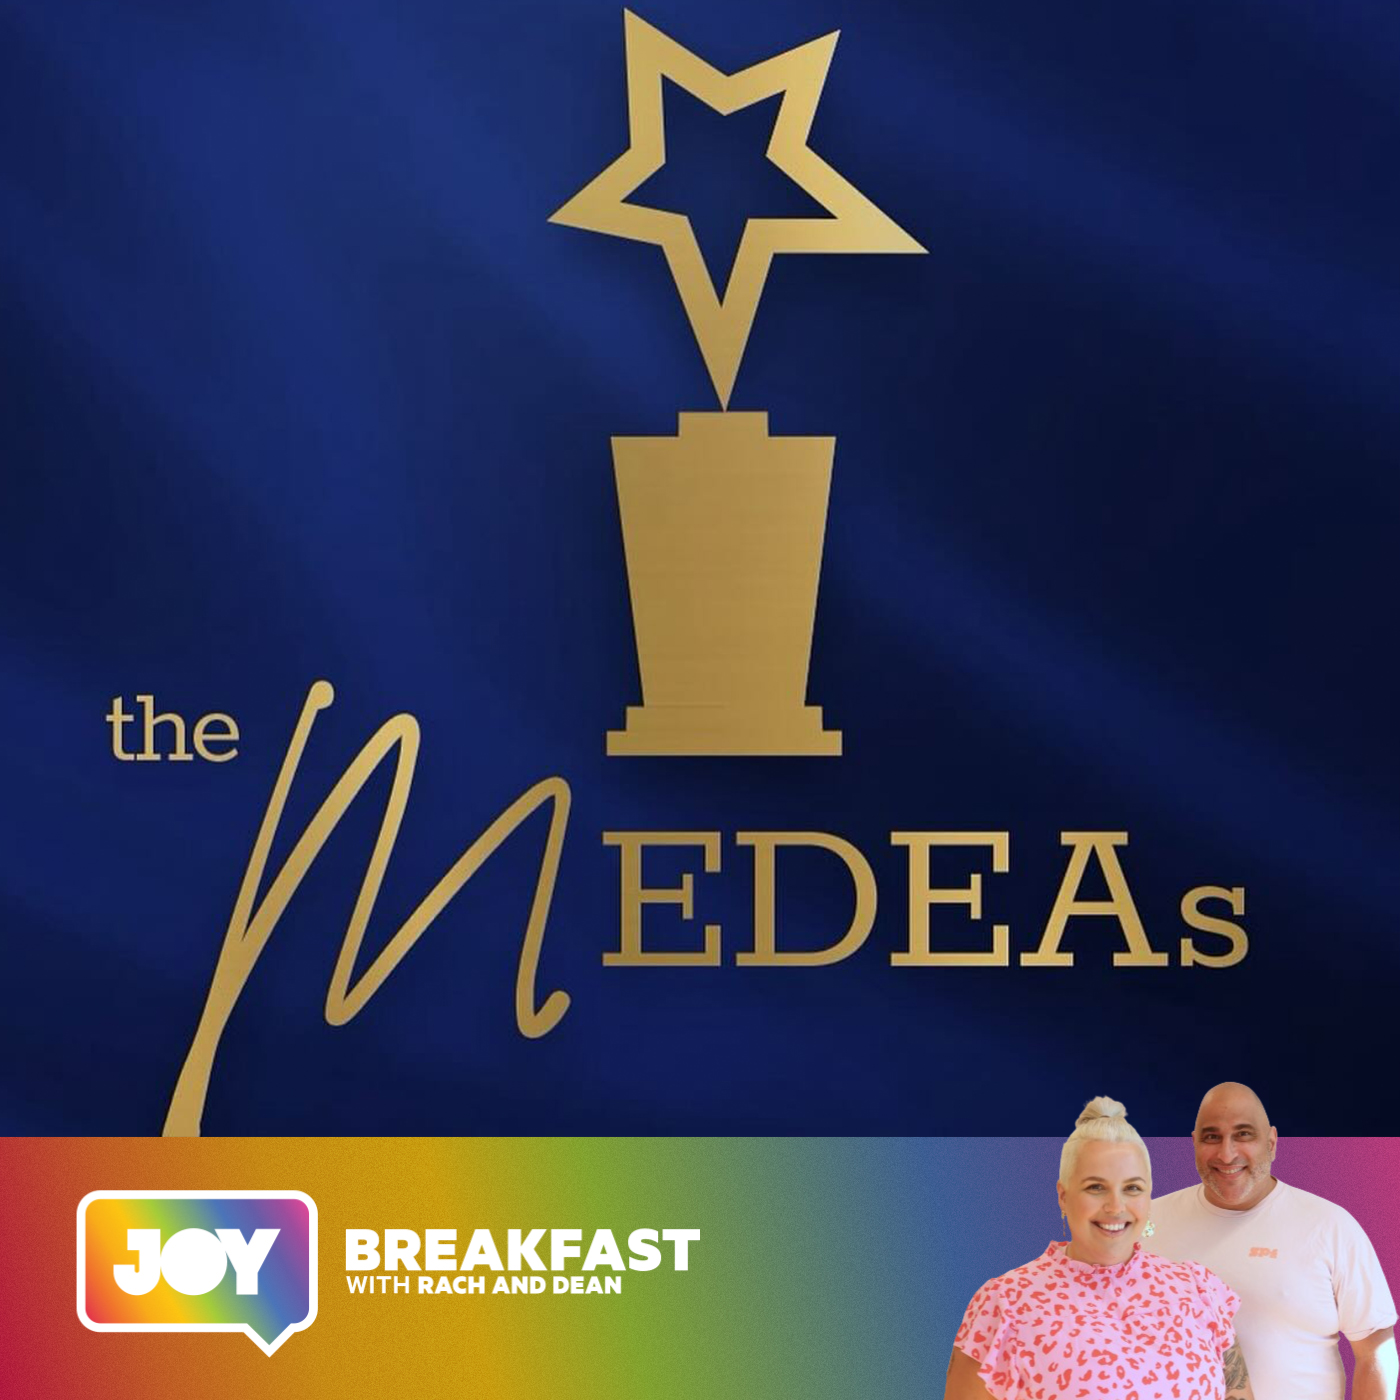 Nominations open for Melbourne Excellence in Drag & Entertainment Awards (MEDEAs)